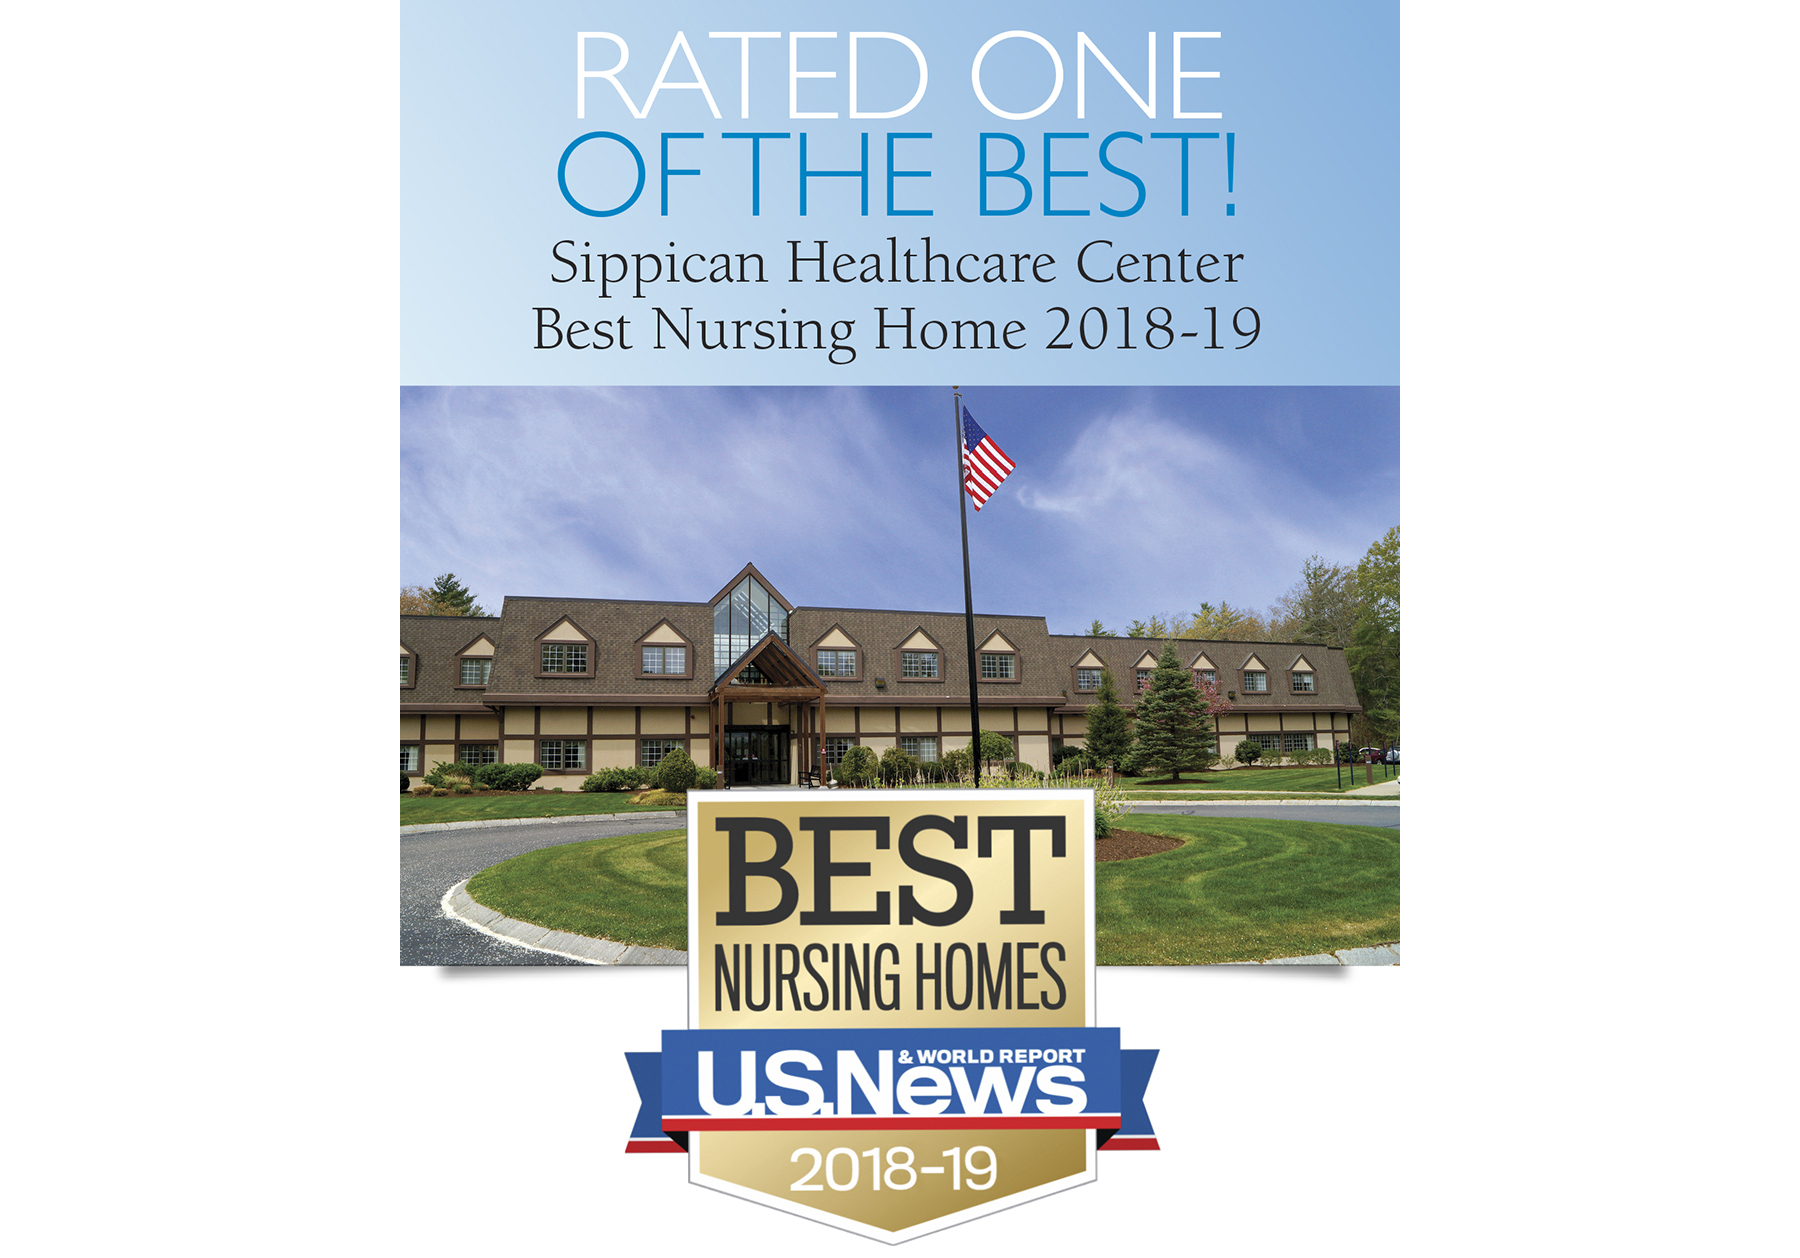 Another Whittier facility – Sippican Healthcare Center – recognized as a “Best Nursing Home” by U.S. News & World Report 2018-19!